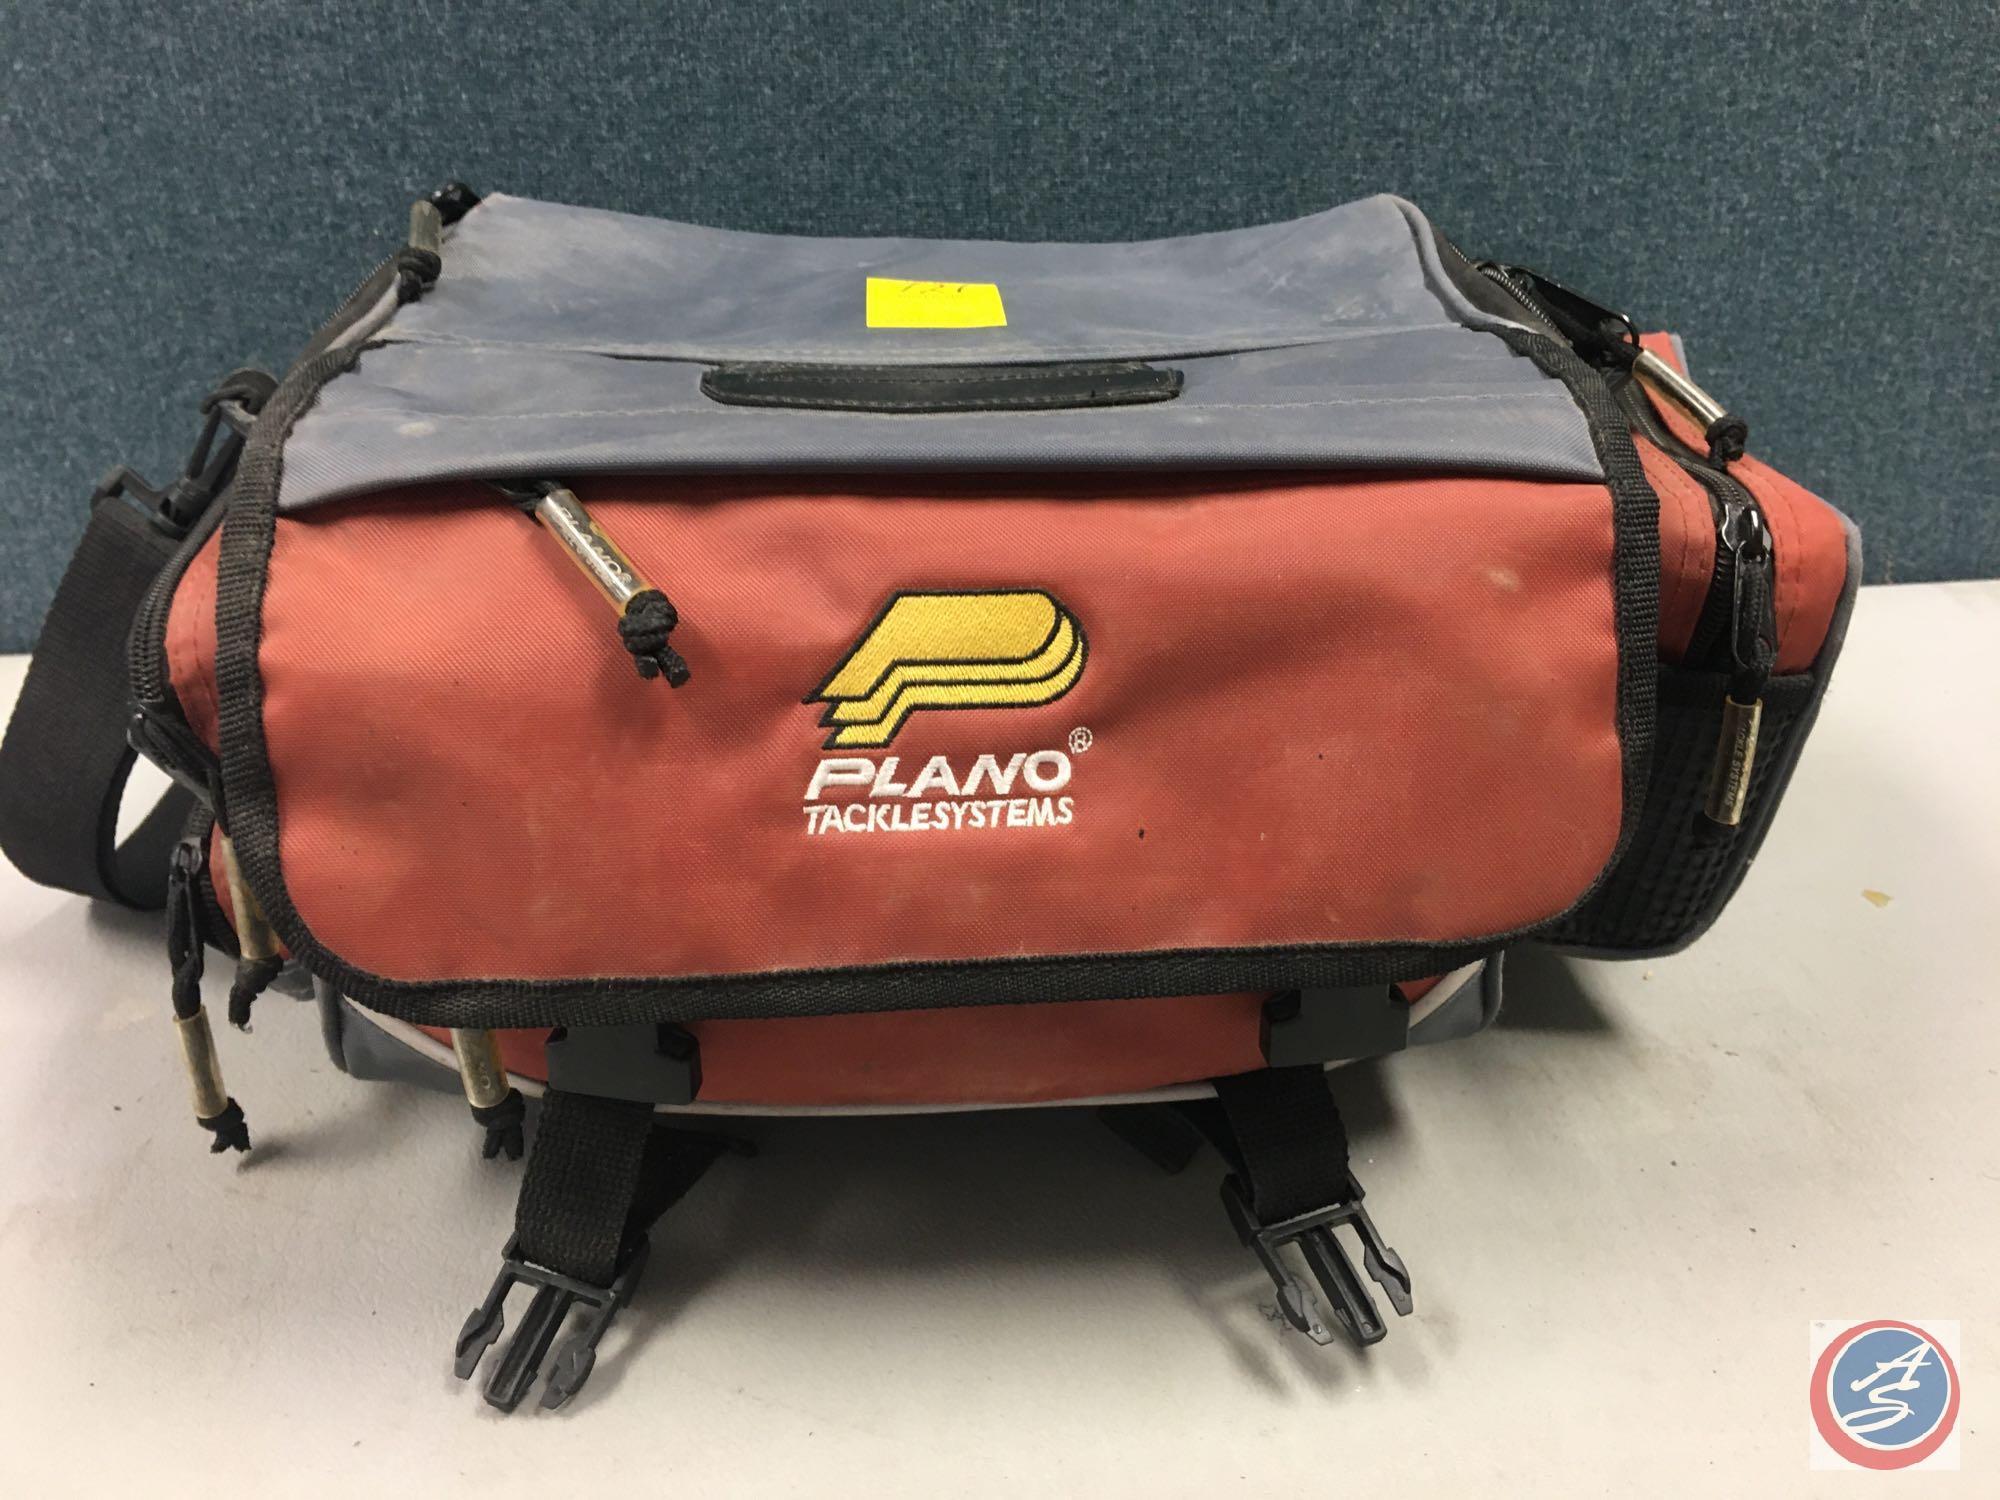 Plano tackle system storage bag w/contents included - Lures of the various types, Hooks, Weights,